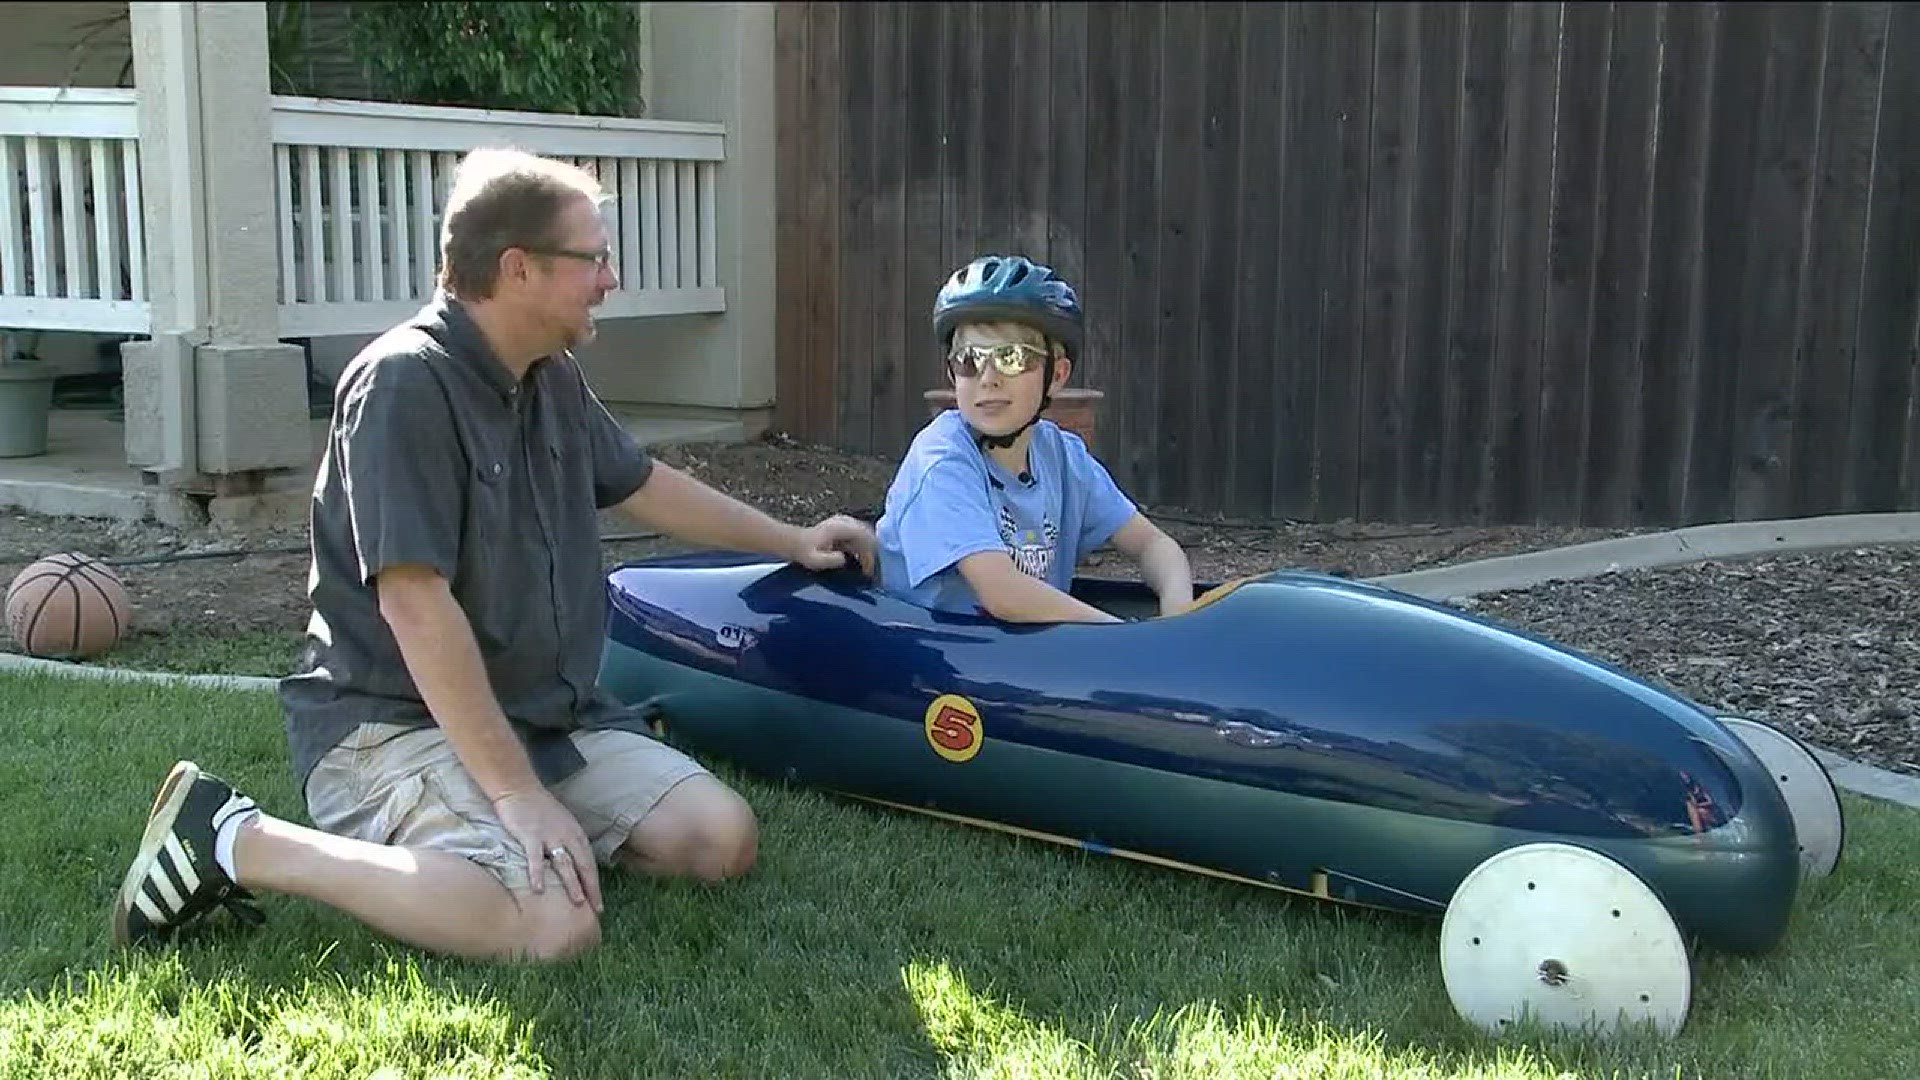 A father is seeing his soap box derby dream come true with his son.